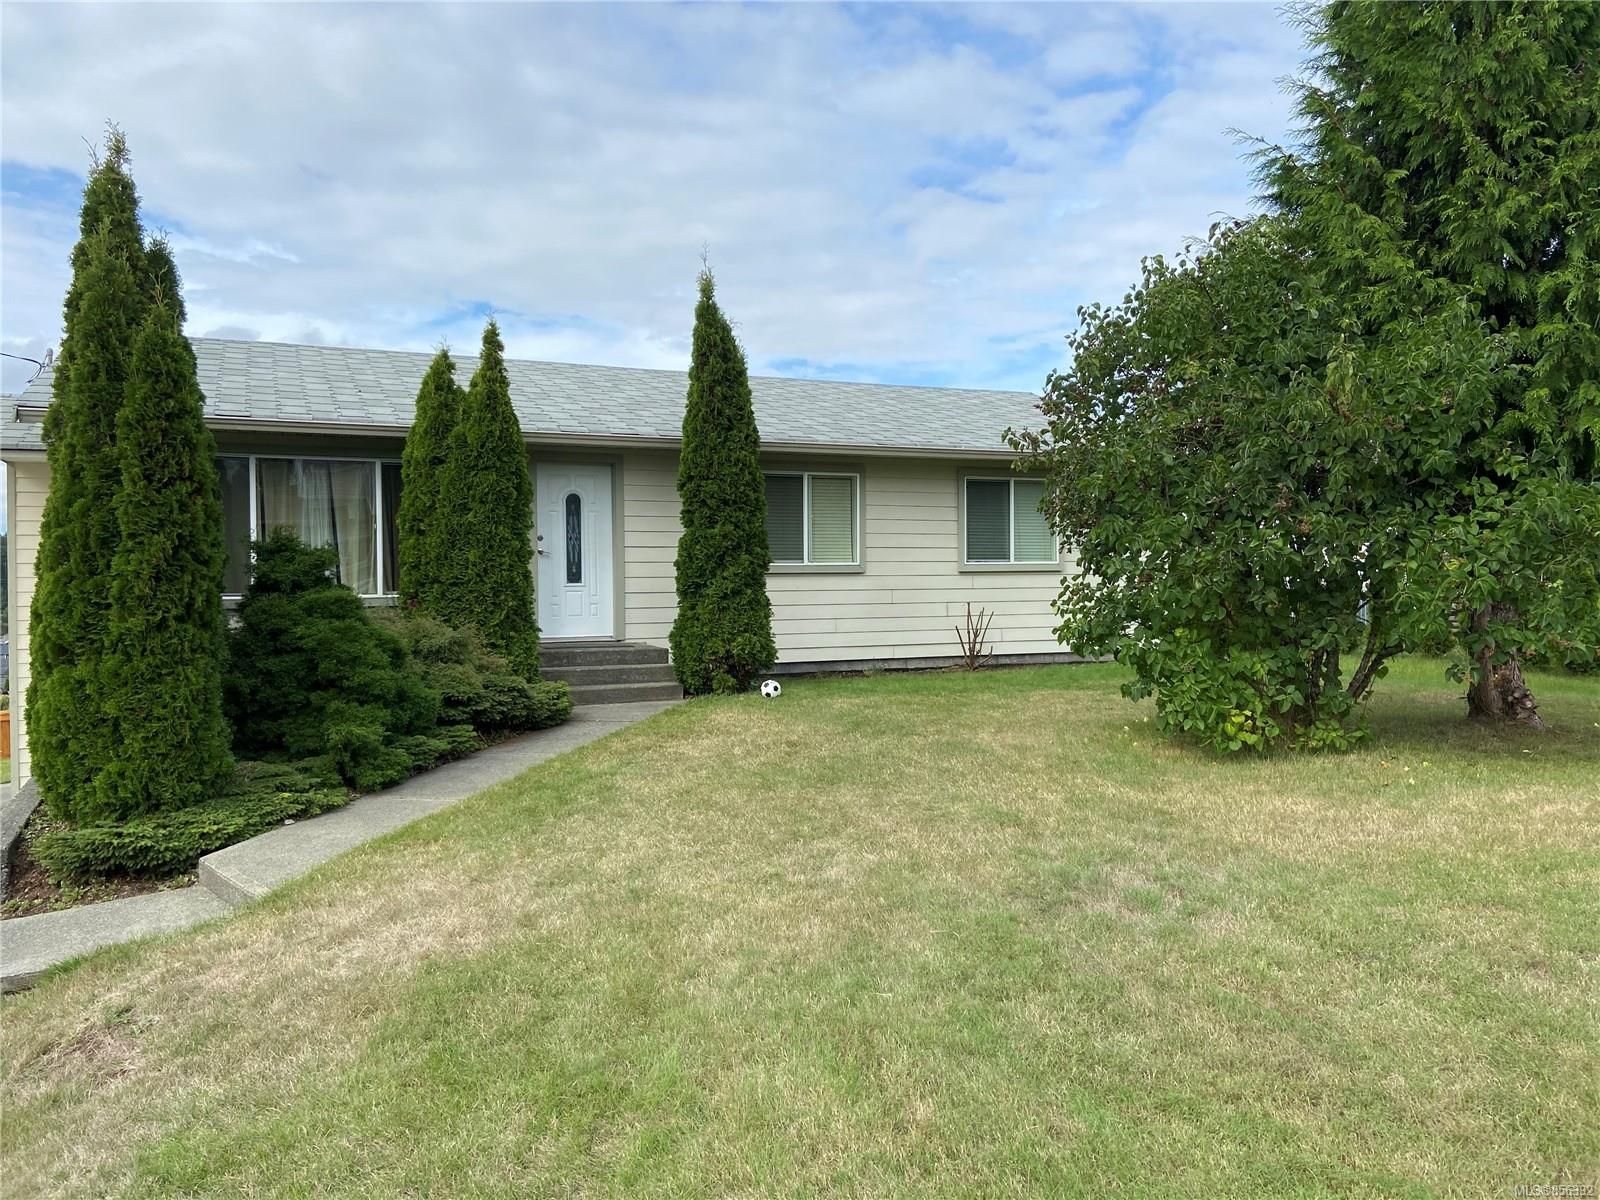 I have sold a property at 470 Quadra Ave
